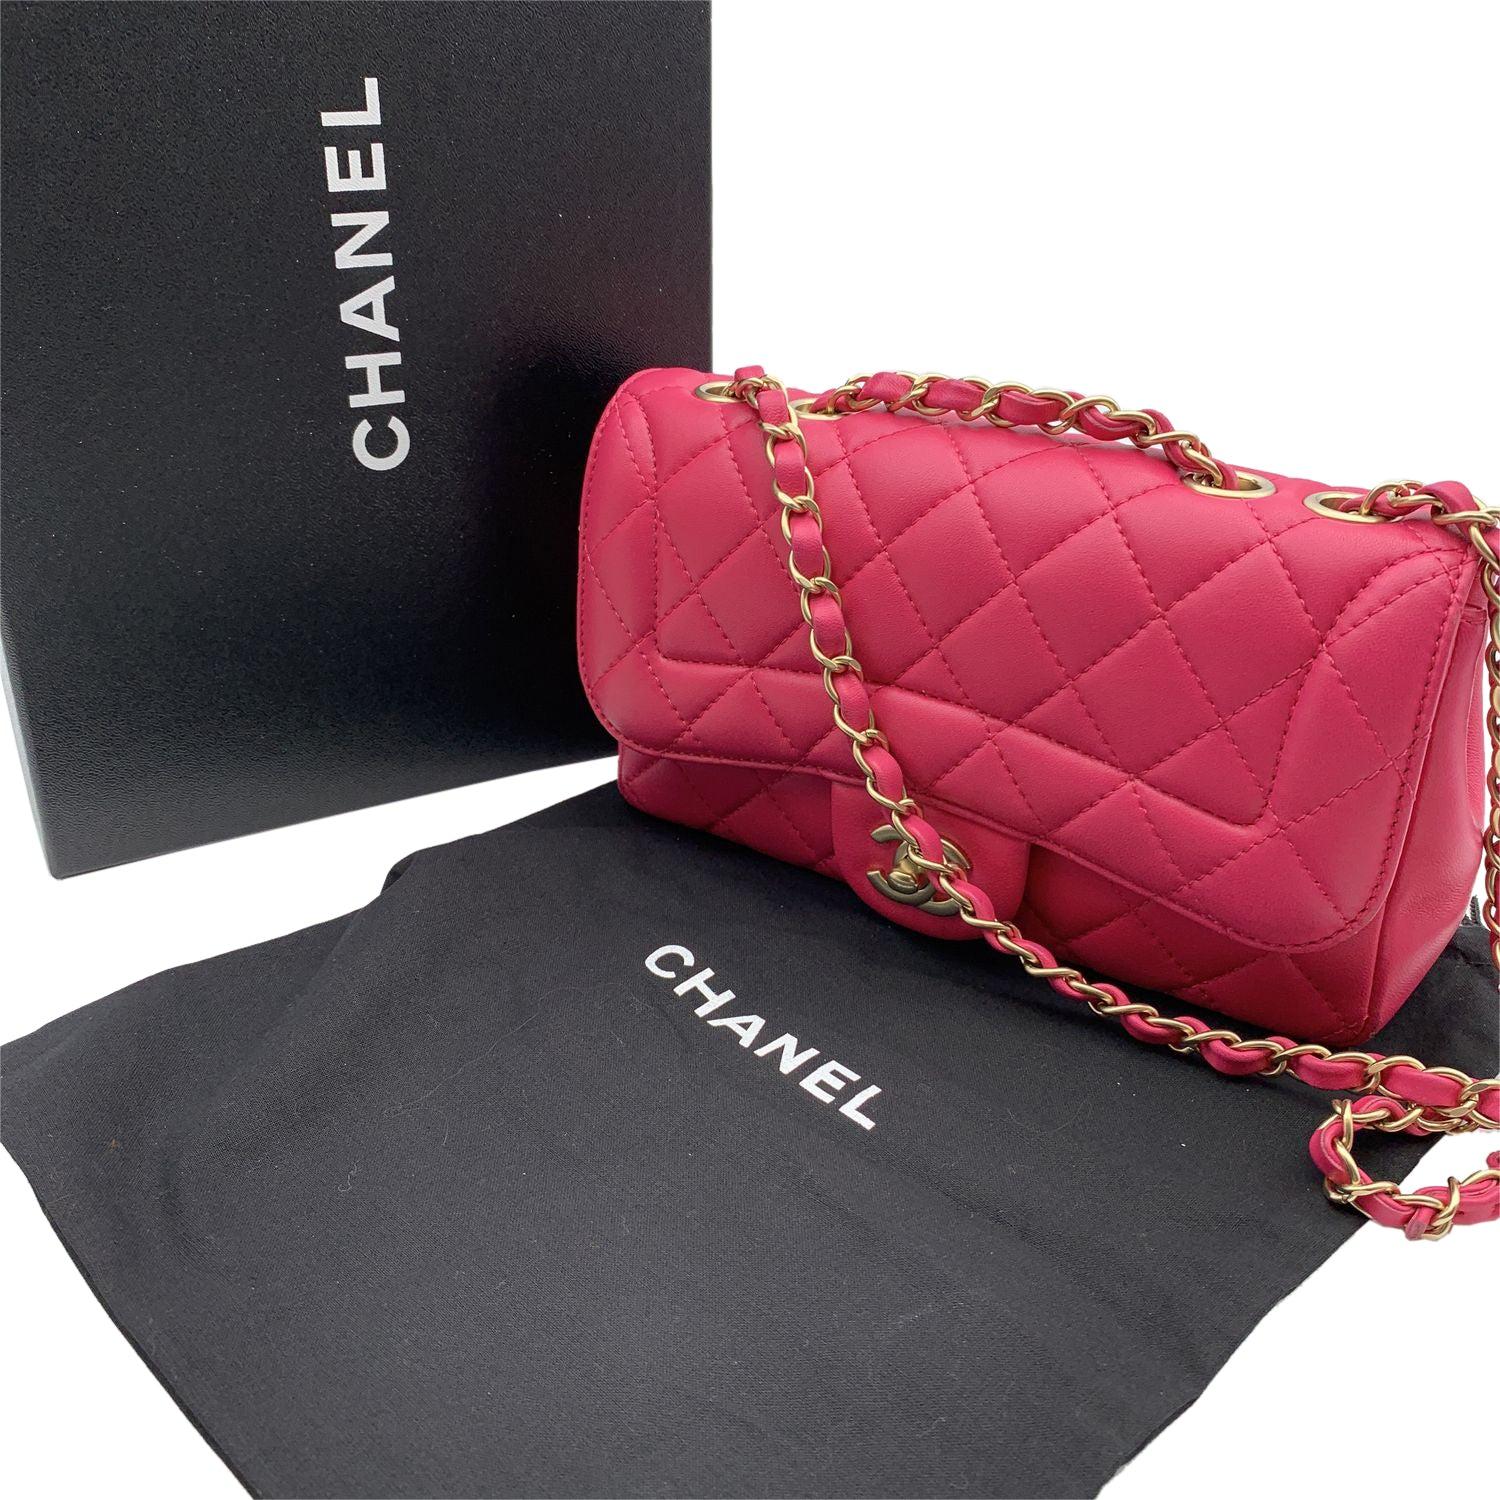 Chanel Pink Quilted Leather Mini Mademoiselle Chic Shoulder Bag In Excellent Condition For Sale In Rome, Rome